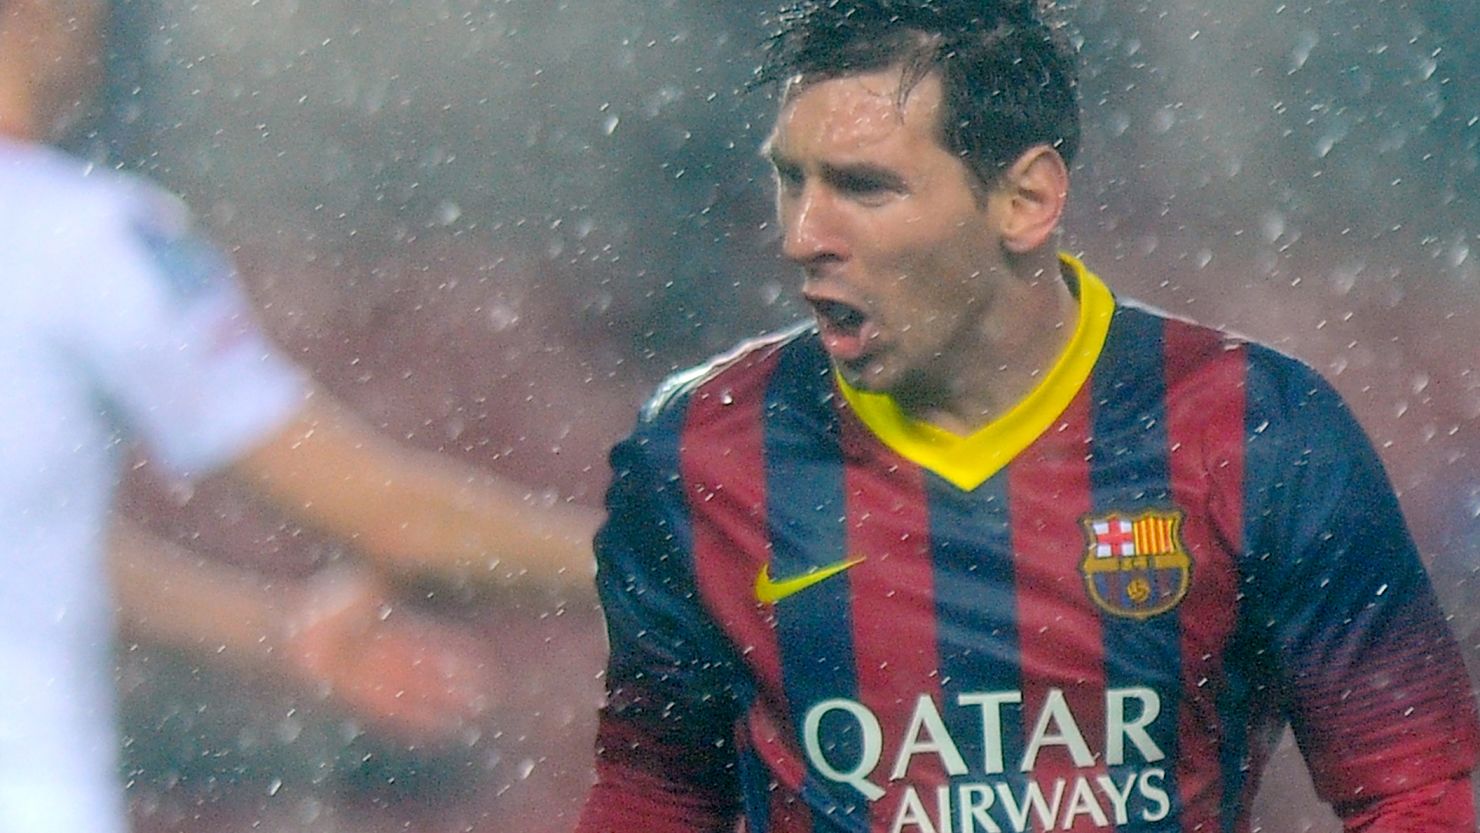 A soaked but happy Lionel Messi after scoring one of his two goals in Barcelona's 4-1 victory at Sevilla.